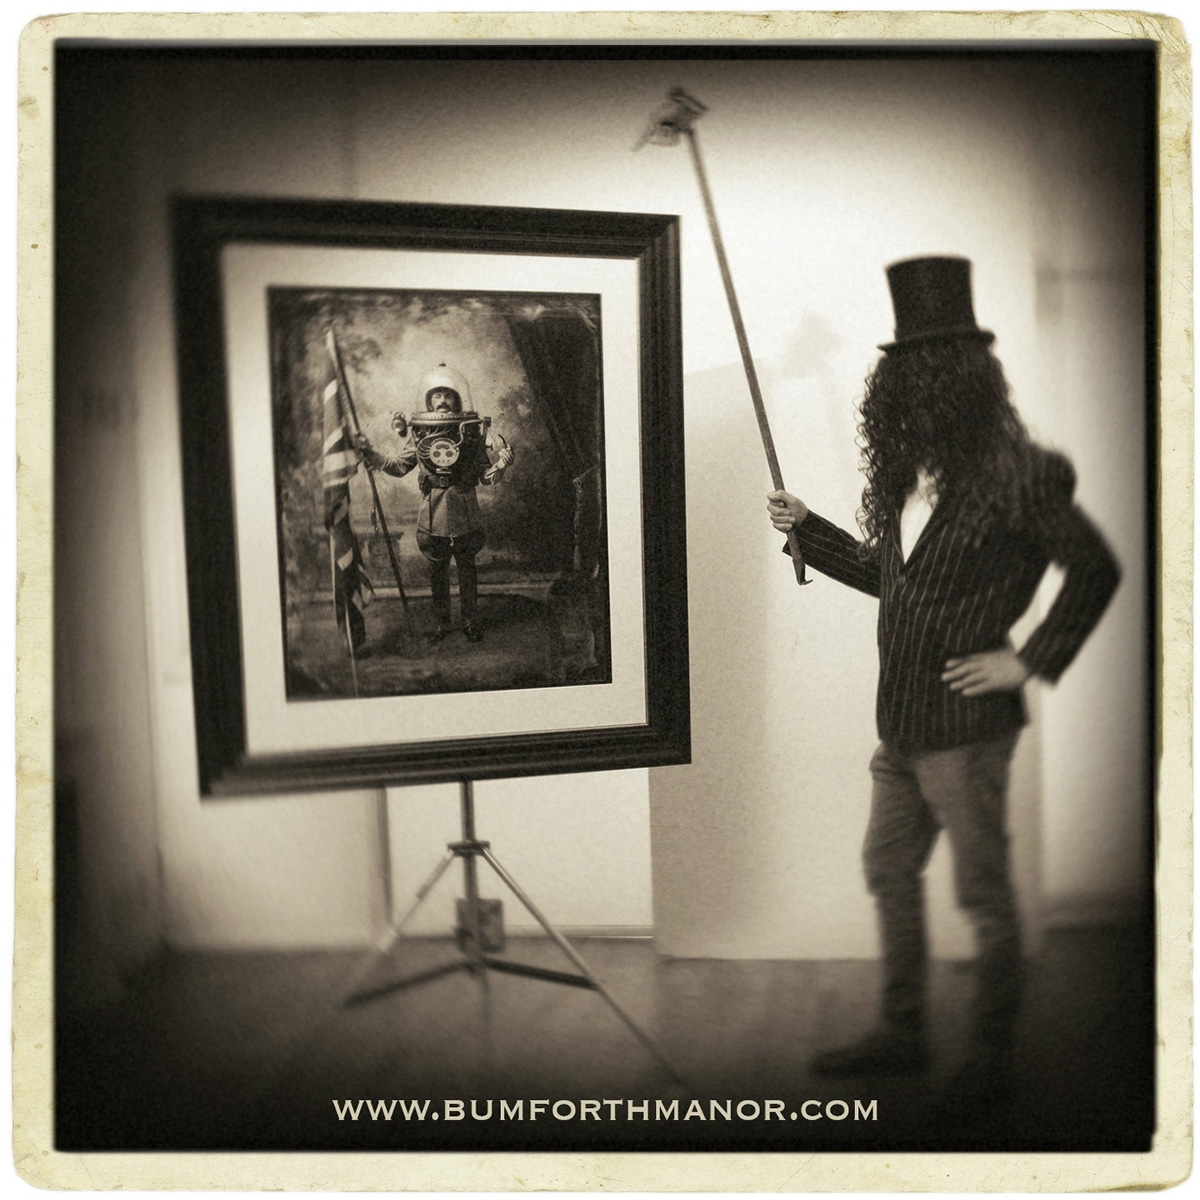 My victorian photographic art can be found at www.bumforthmanor.com